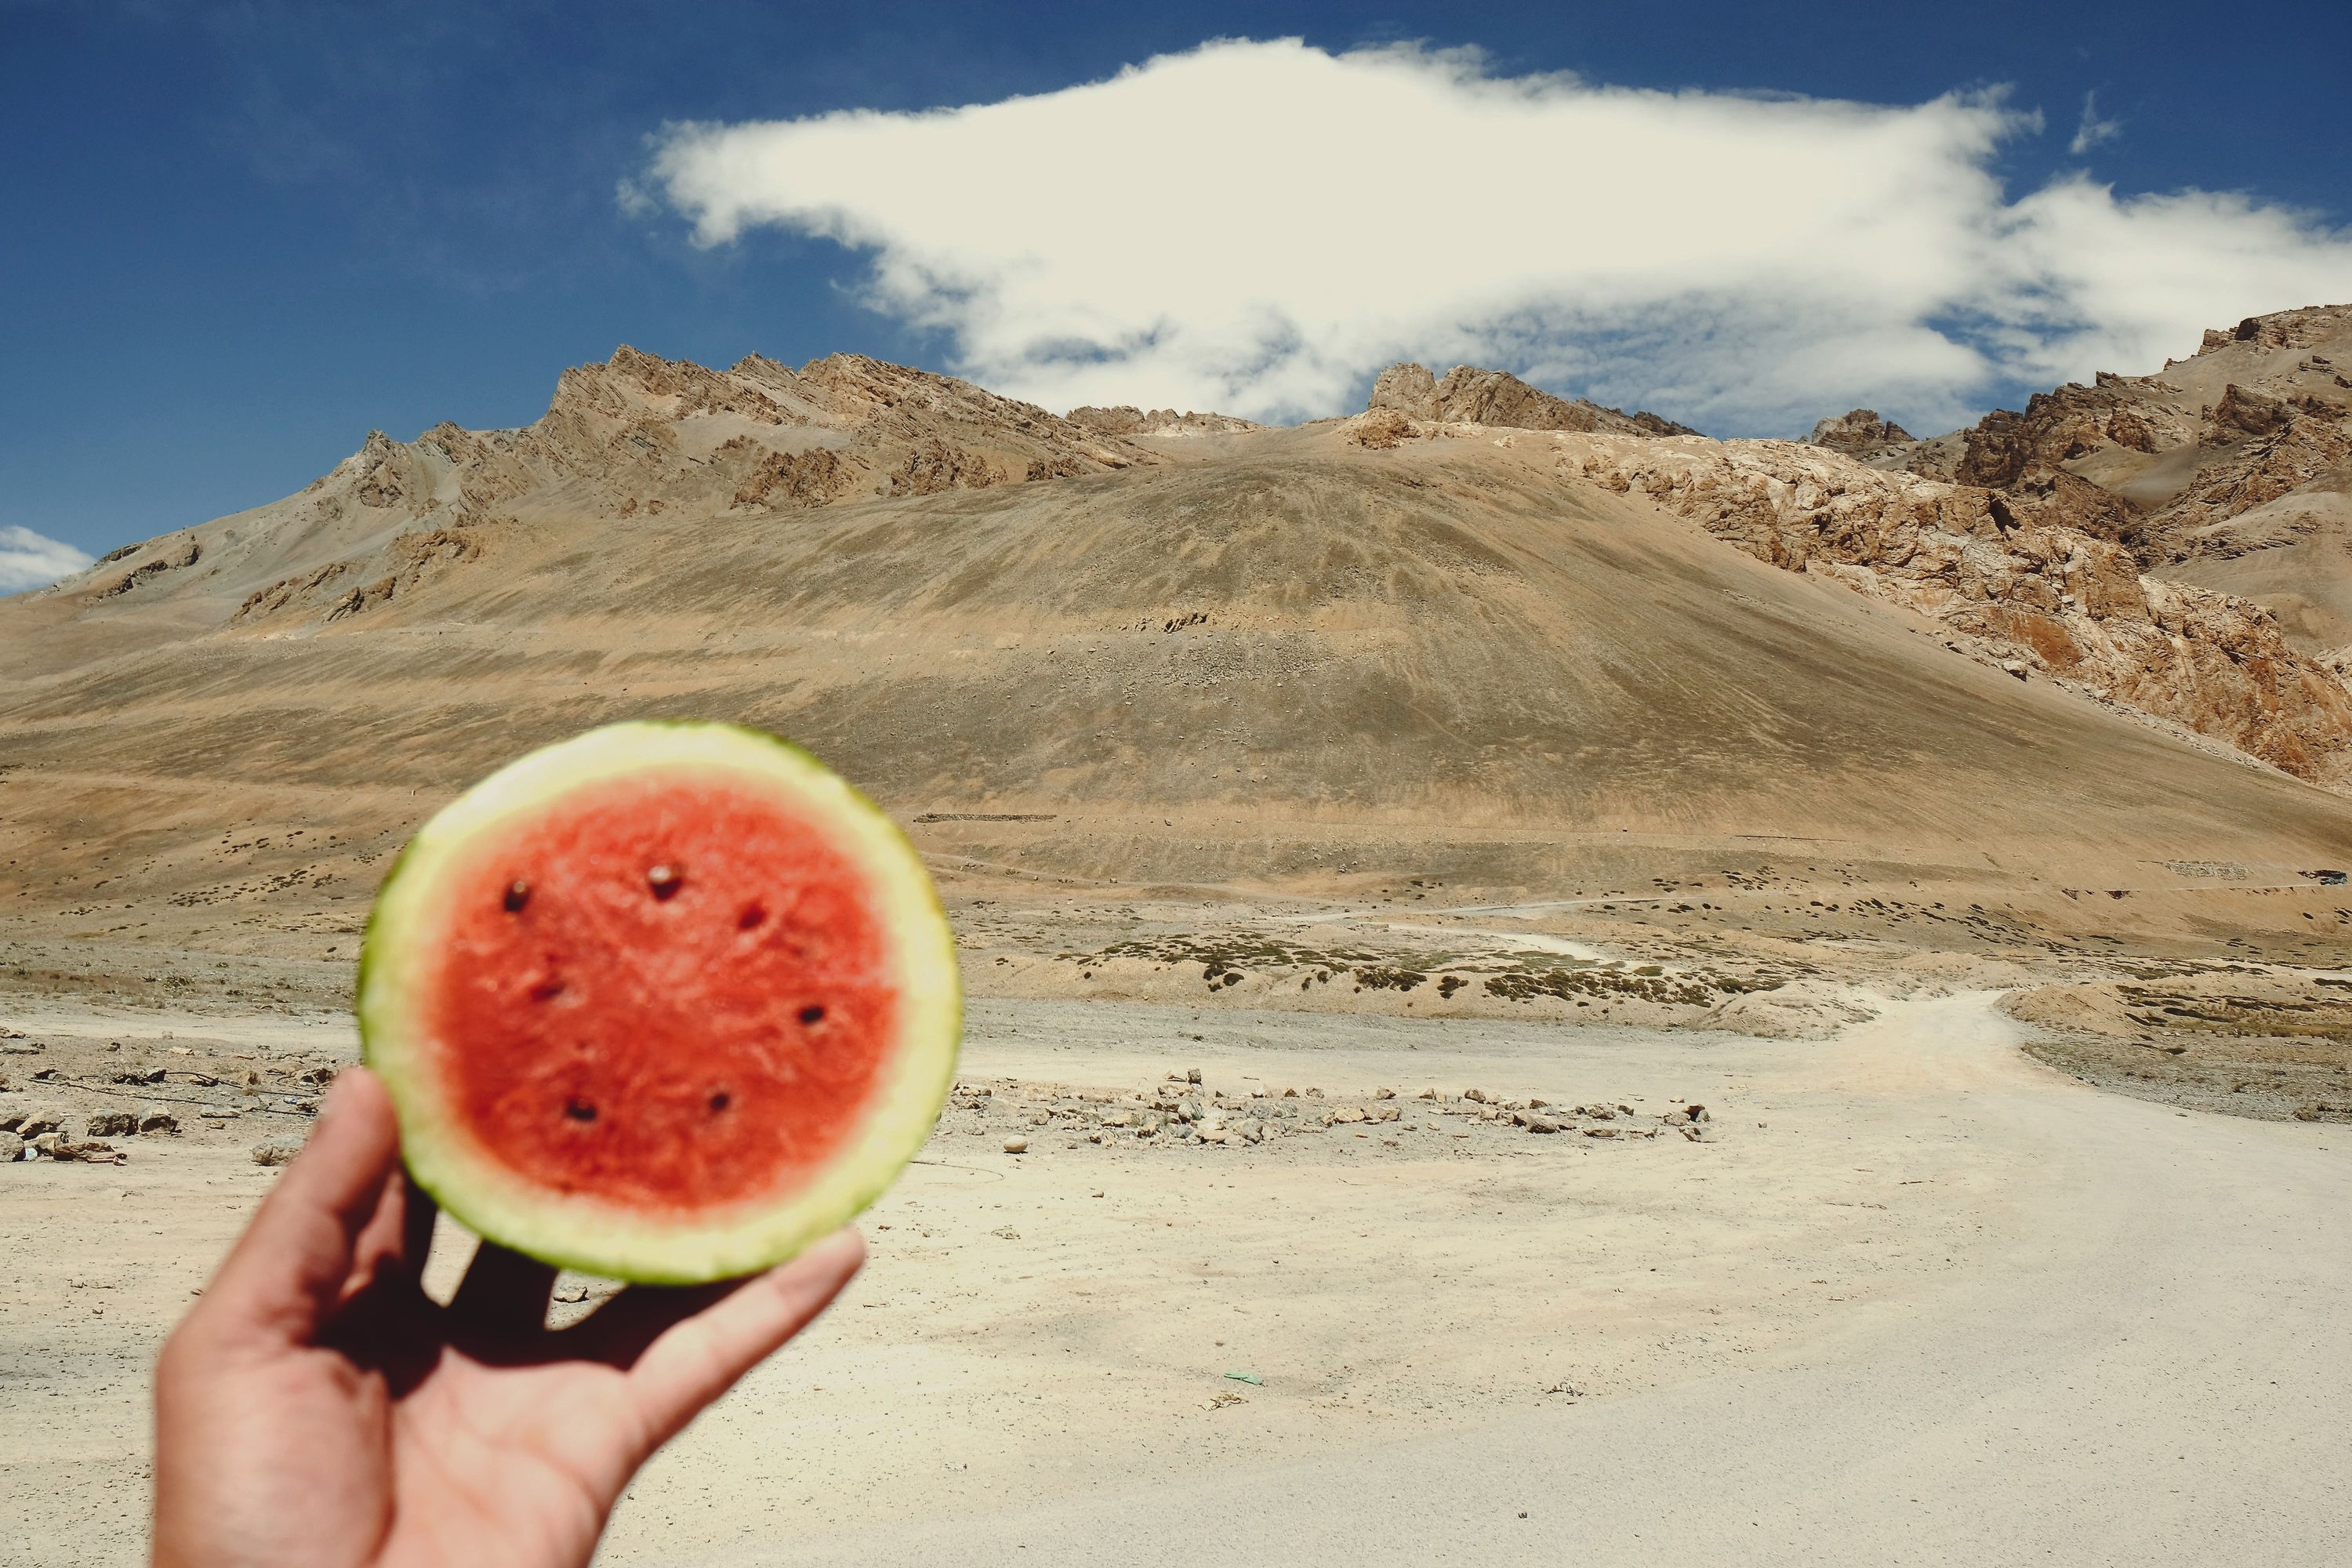 Selfie 2: The red slice posing for a selfie. Ladakh, India. August 2021.